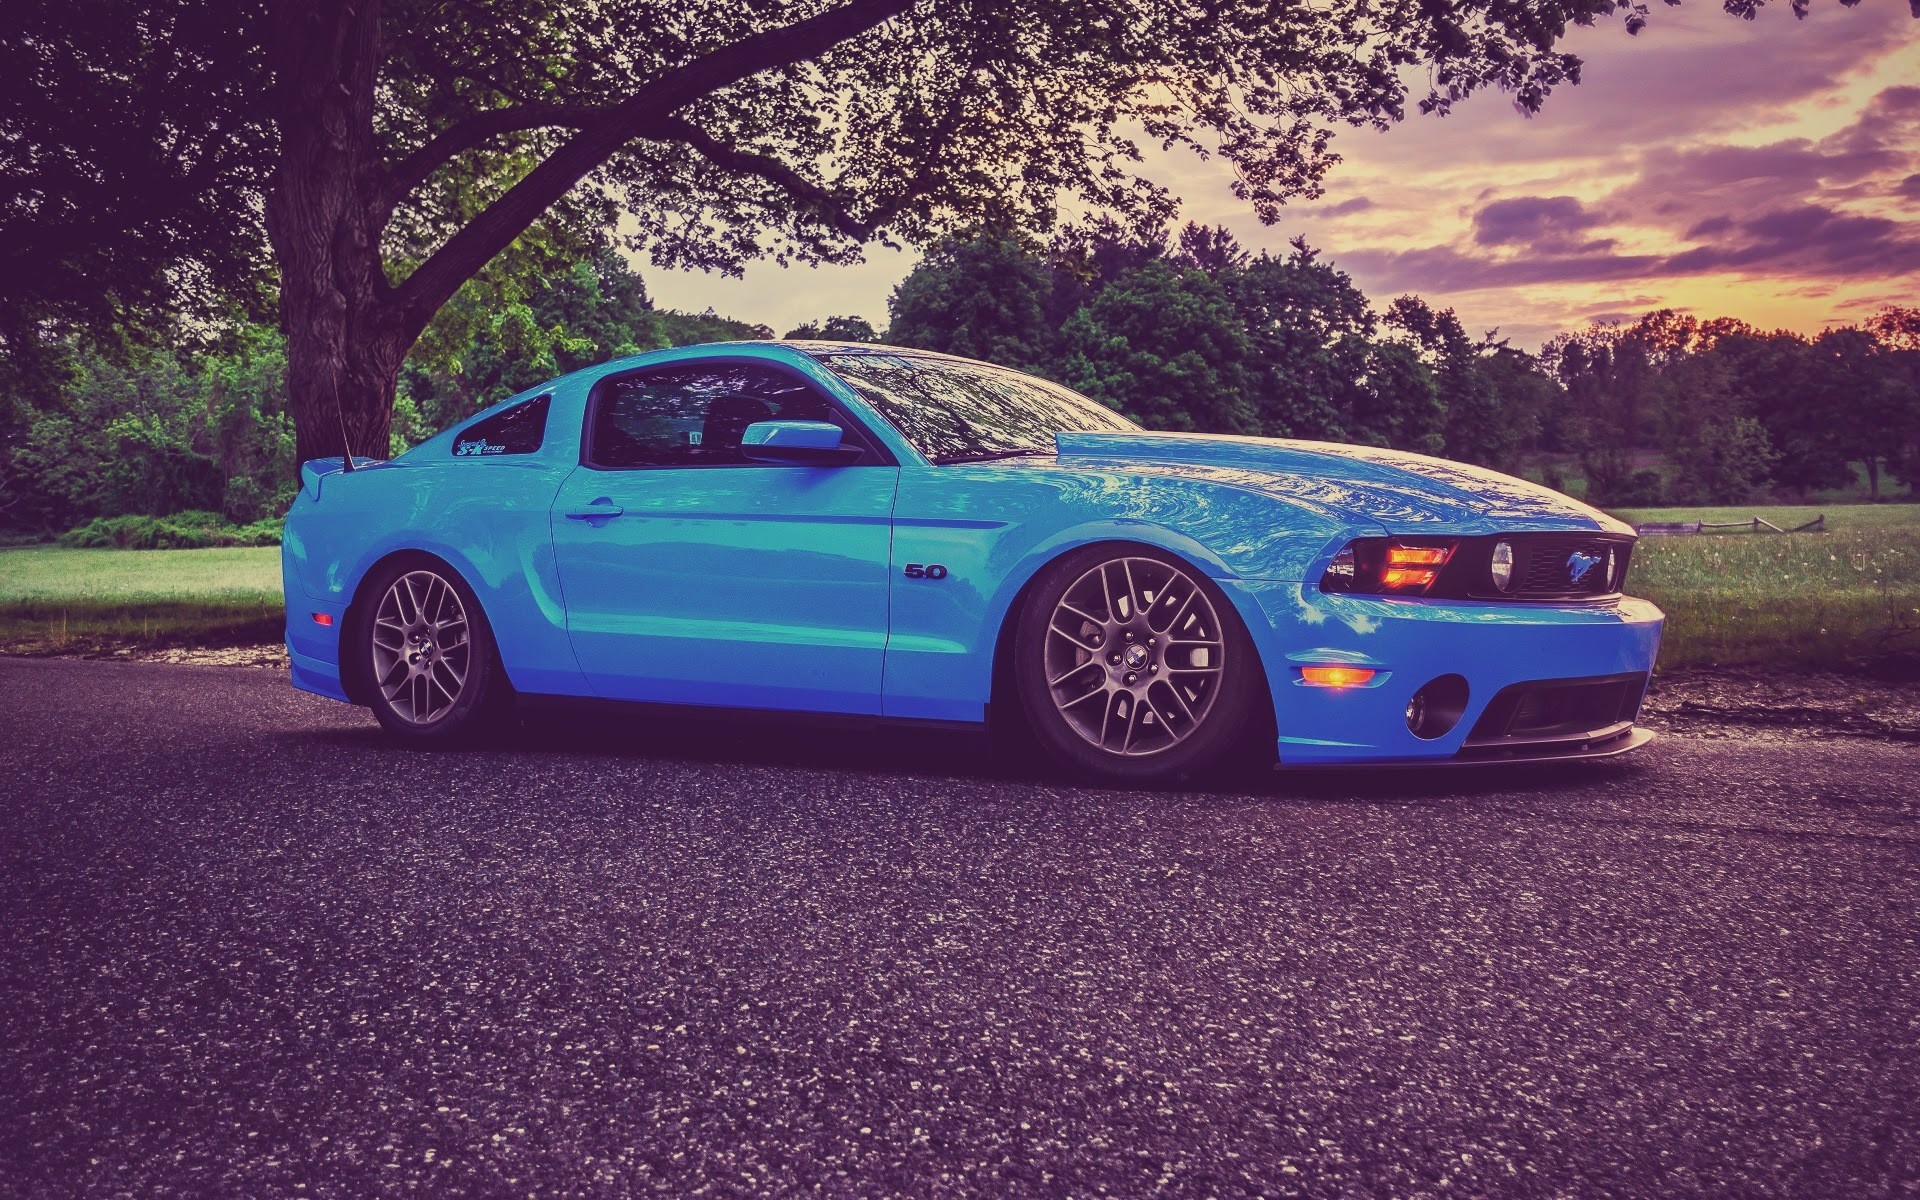 Ford Mustang, Muscle Cars, Low Ride, Tuning, Blue Cars Wallpaper